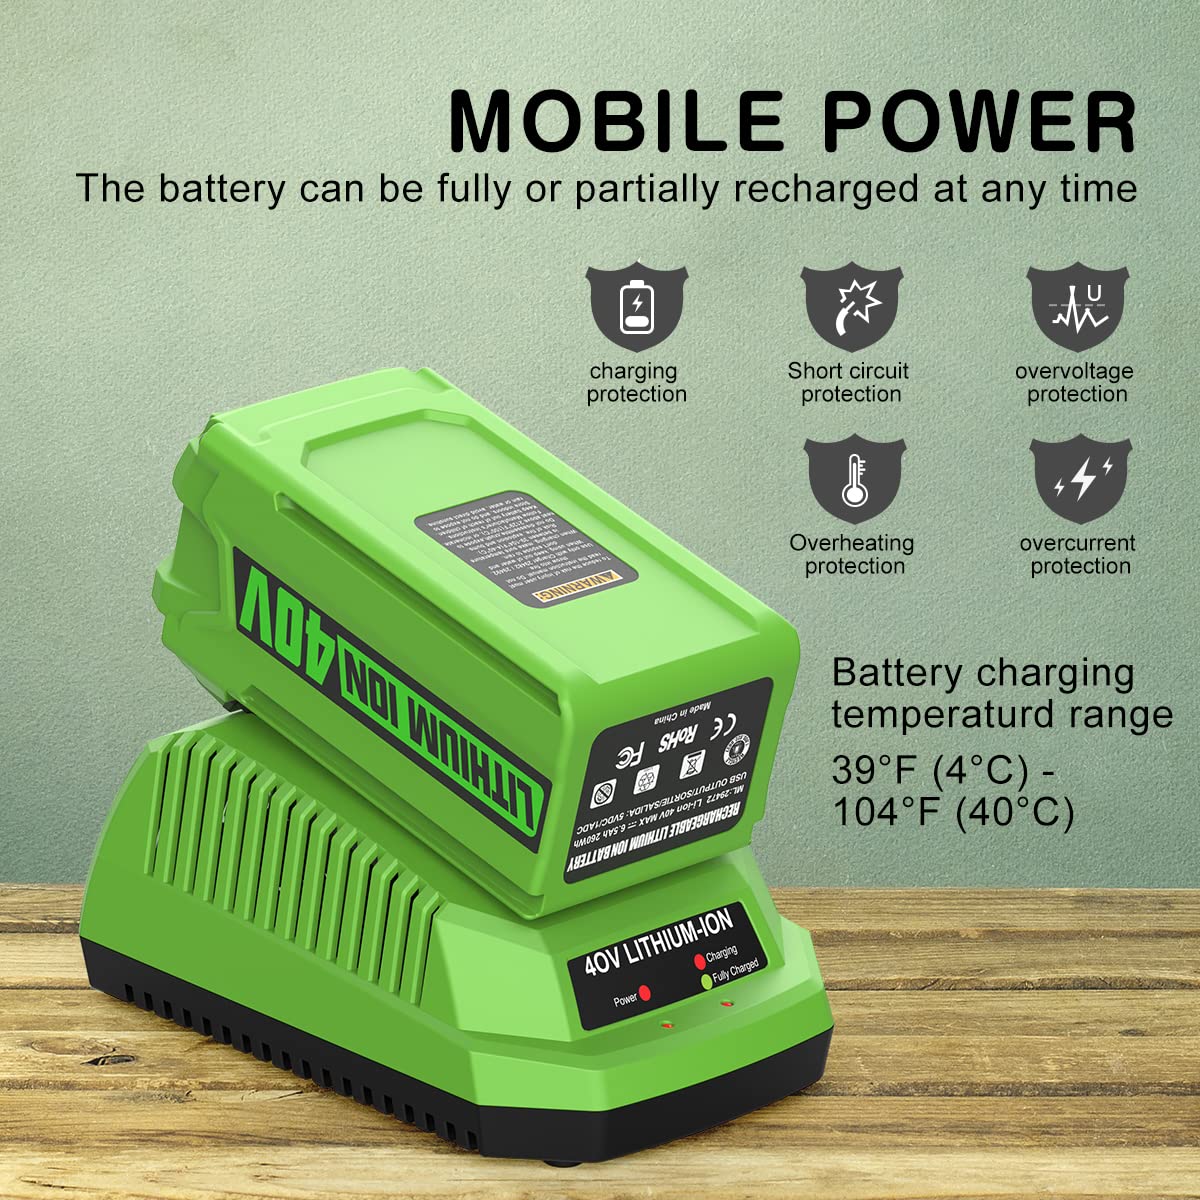 Powilling 6.5Ah 40V 29472 29462 Battery Replacement for Greenworks 40V Battery and Charger 29482 Compatible with Greenworks 40V G-MAX Power Tools 29252 20202 22262 Smart USB 40V Greenworks Battery